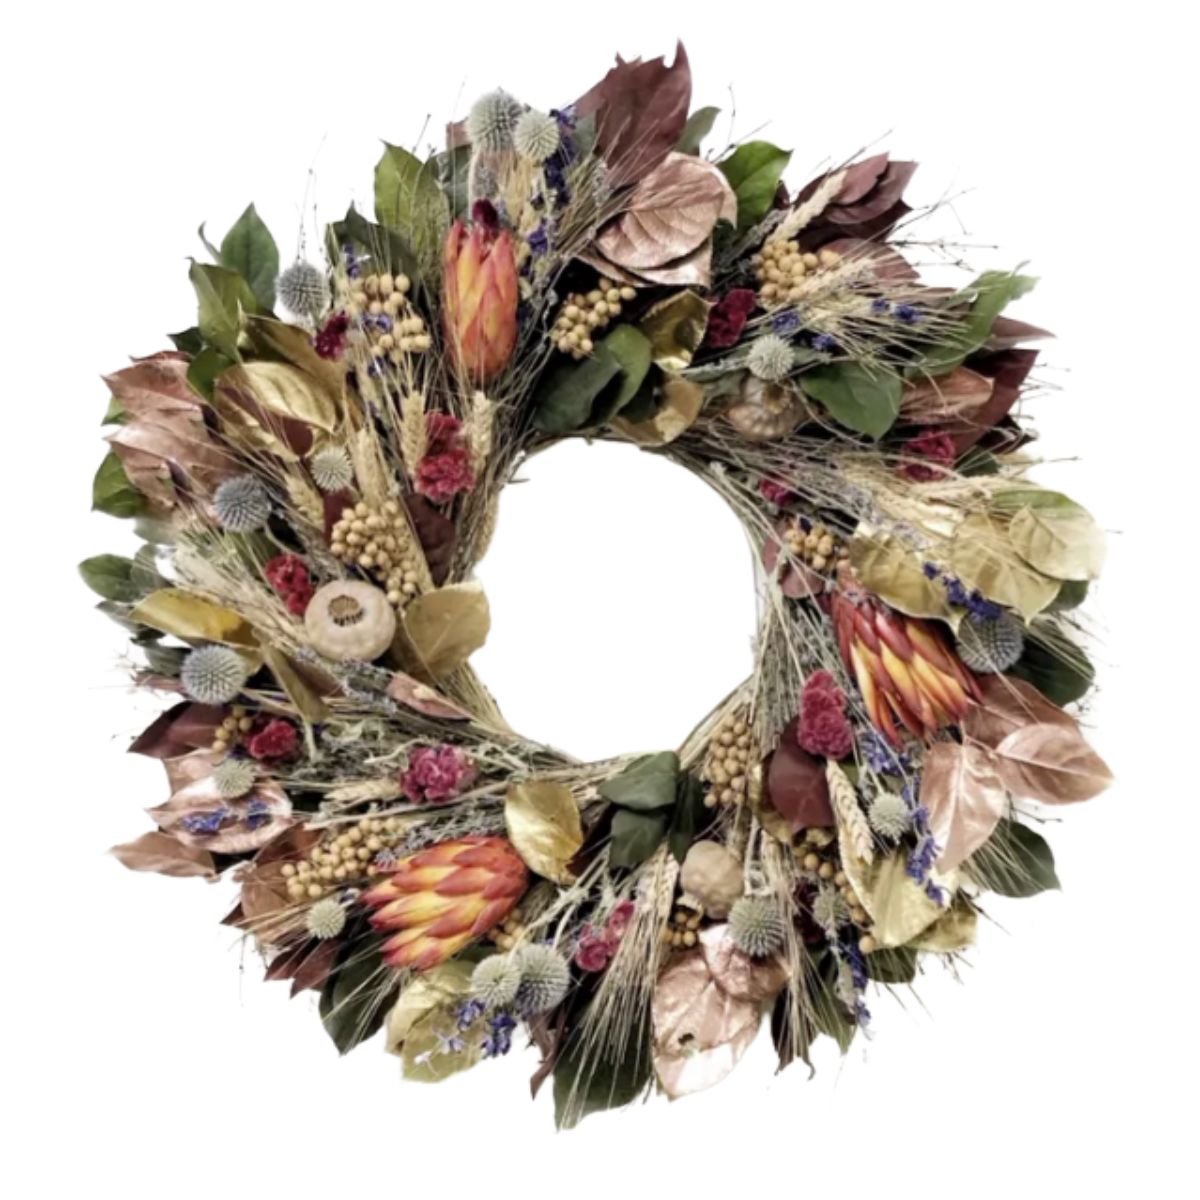 fall wreath made with blond wheat, natural canella berries, quail brush, Echinops, blue larkspur, and burgundy celosia from wayfair